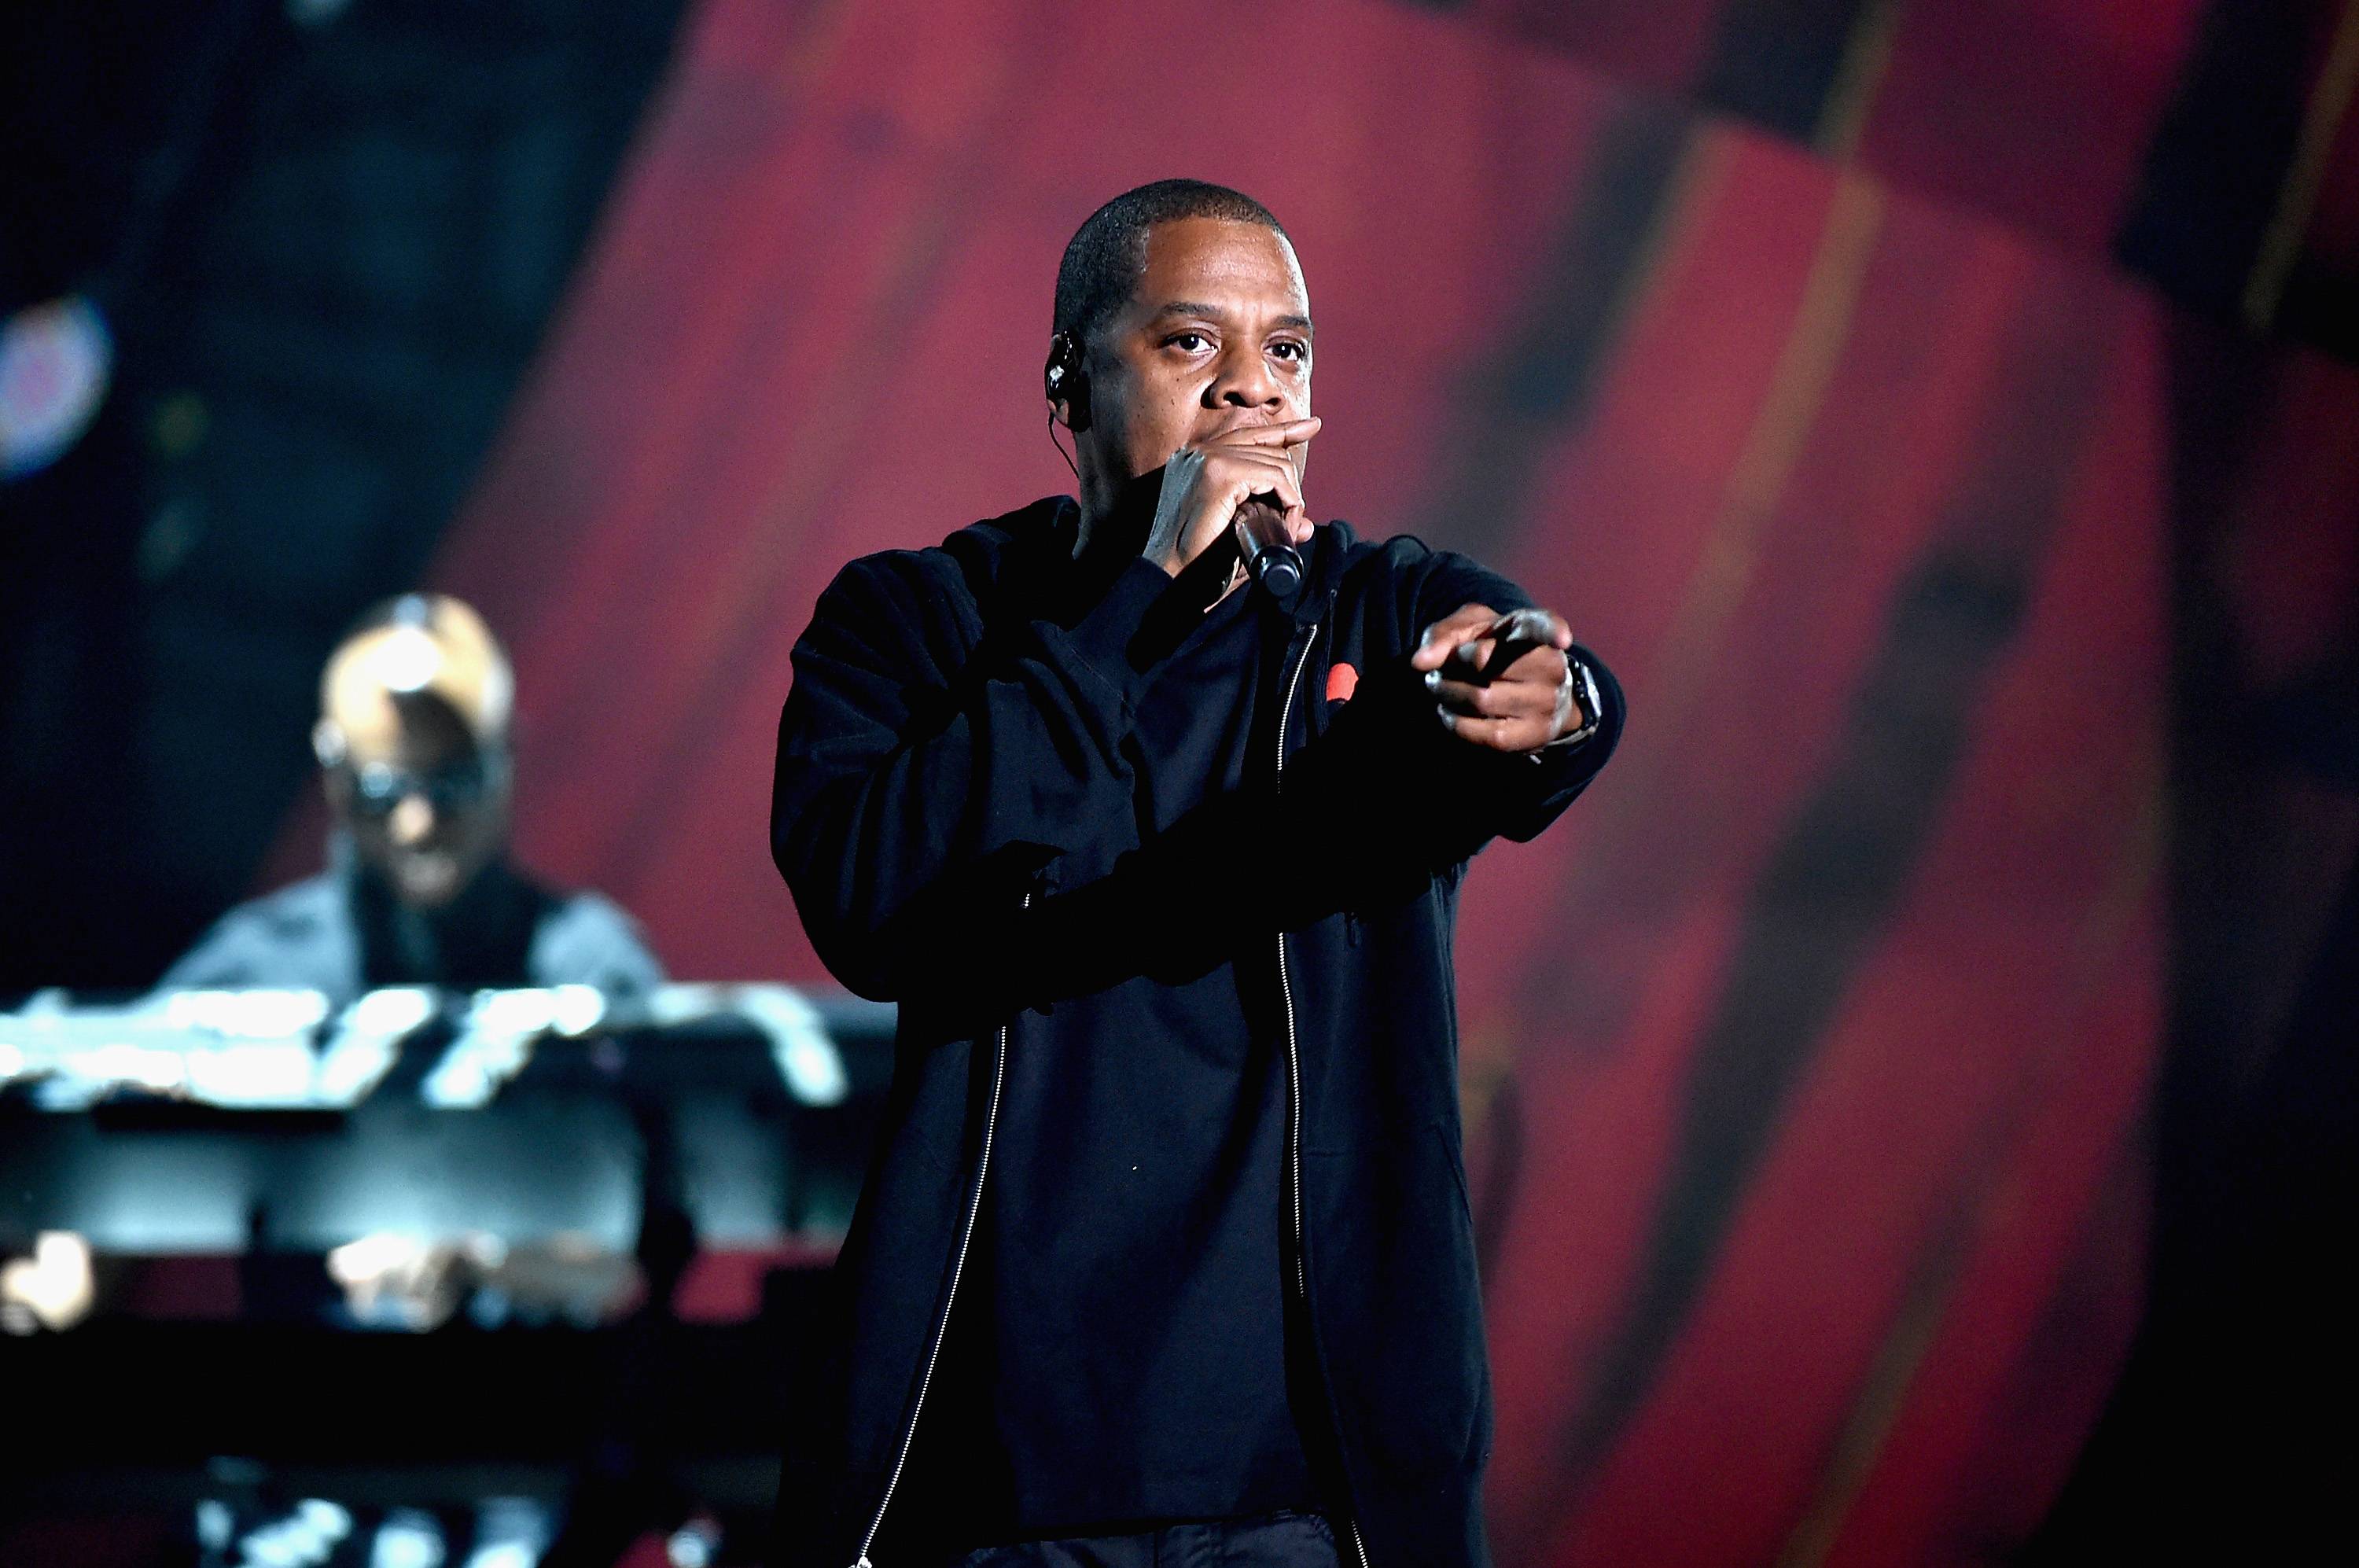 No Interviews, Just Verses - In true Jay Z fashion, any question about the rapper’s personal life or his reaction to media messiness are answered through his verses. Remember when this TV personality tried to drag Beyoncé over her husband’s past? Well, in Hov’s latest guest verse on Pusha T’s “Drug Dealers Anonymous” he deals directly with the rogue TV personality with some mean bars and an audio interpolation. Sure enough, this isn’t Jay’s first fire guest verse over the past 20 years. He’s given us and other rappers some legendary bars. – Jon Reyes&nbsp;(Photo: Theo Wargo/Getty Images for Global Citizen Festival)&nbsp;